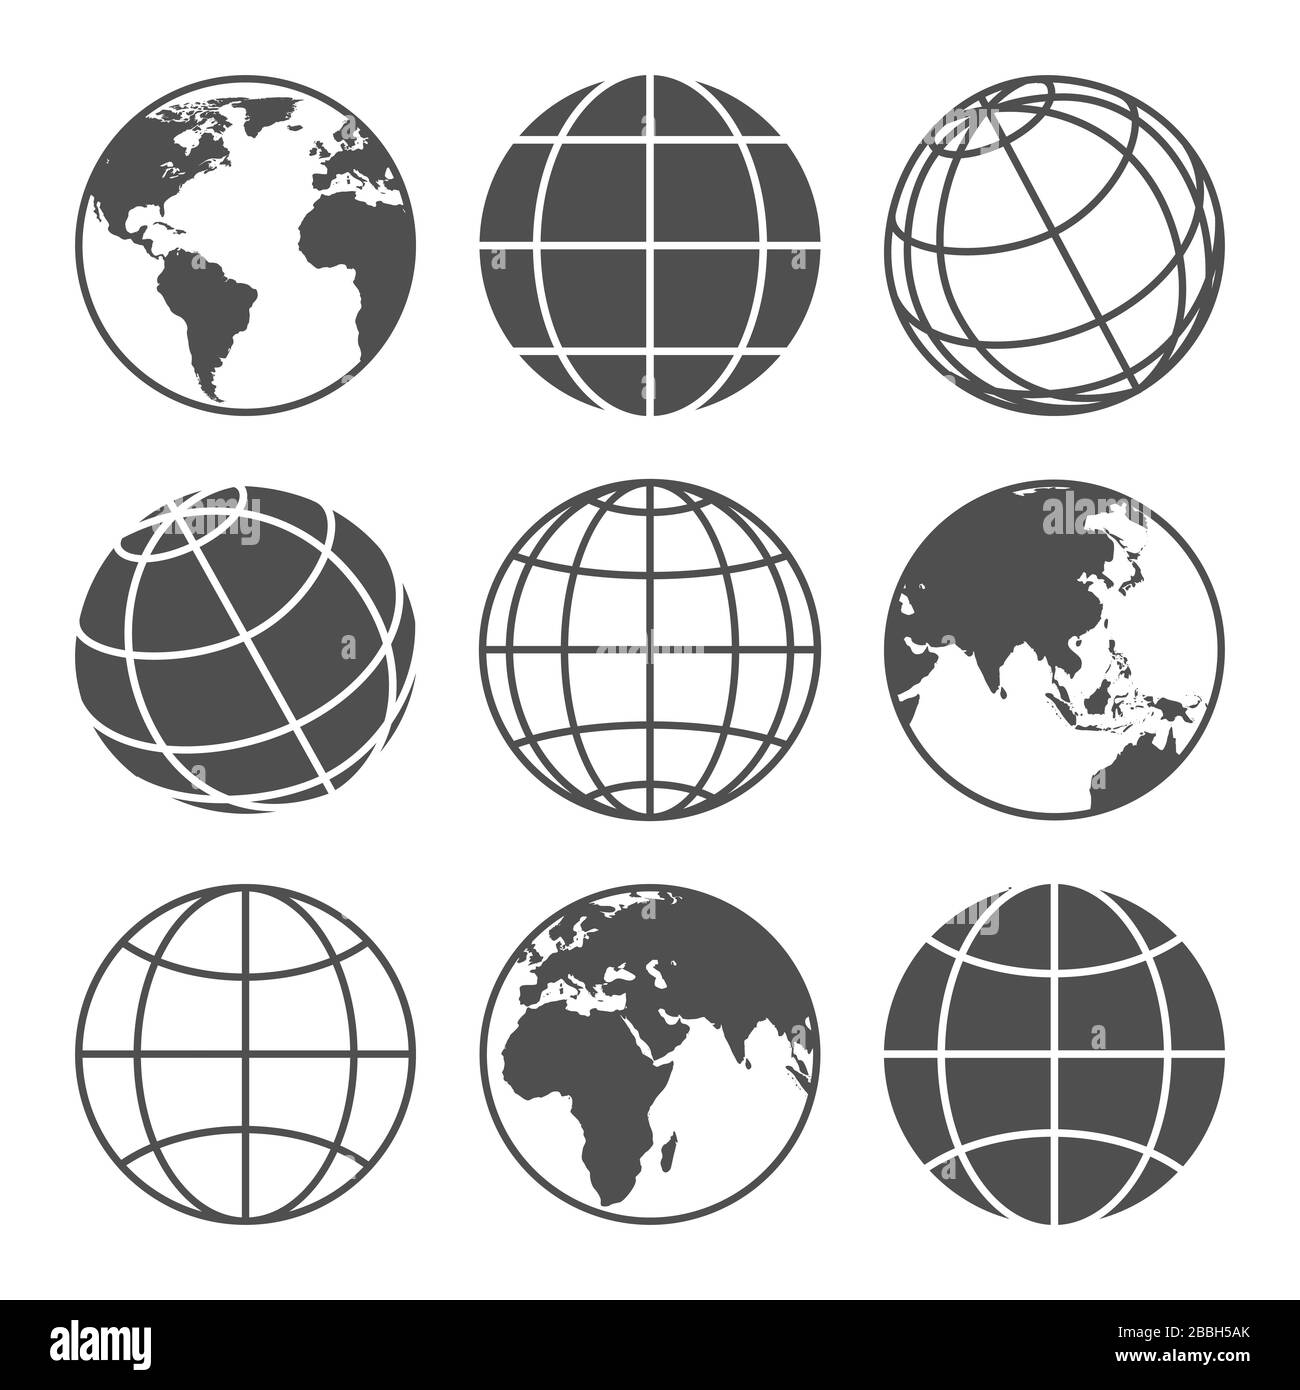 Planet map globe icons Stock Vector